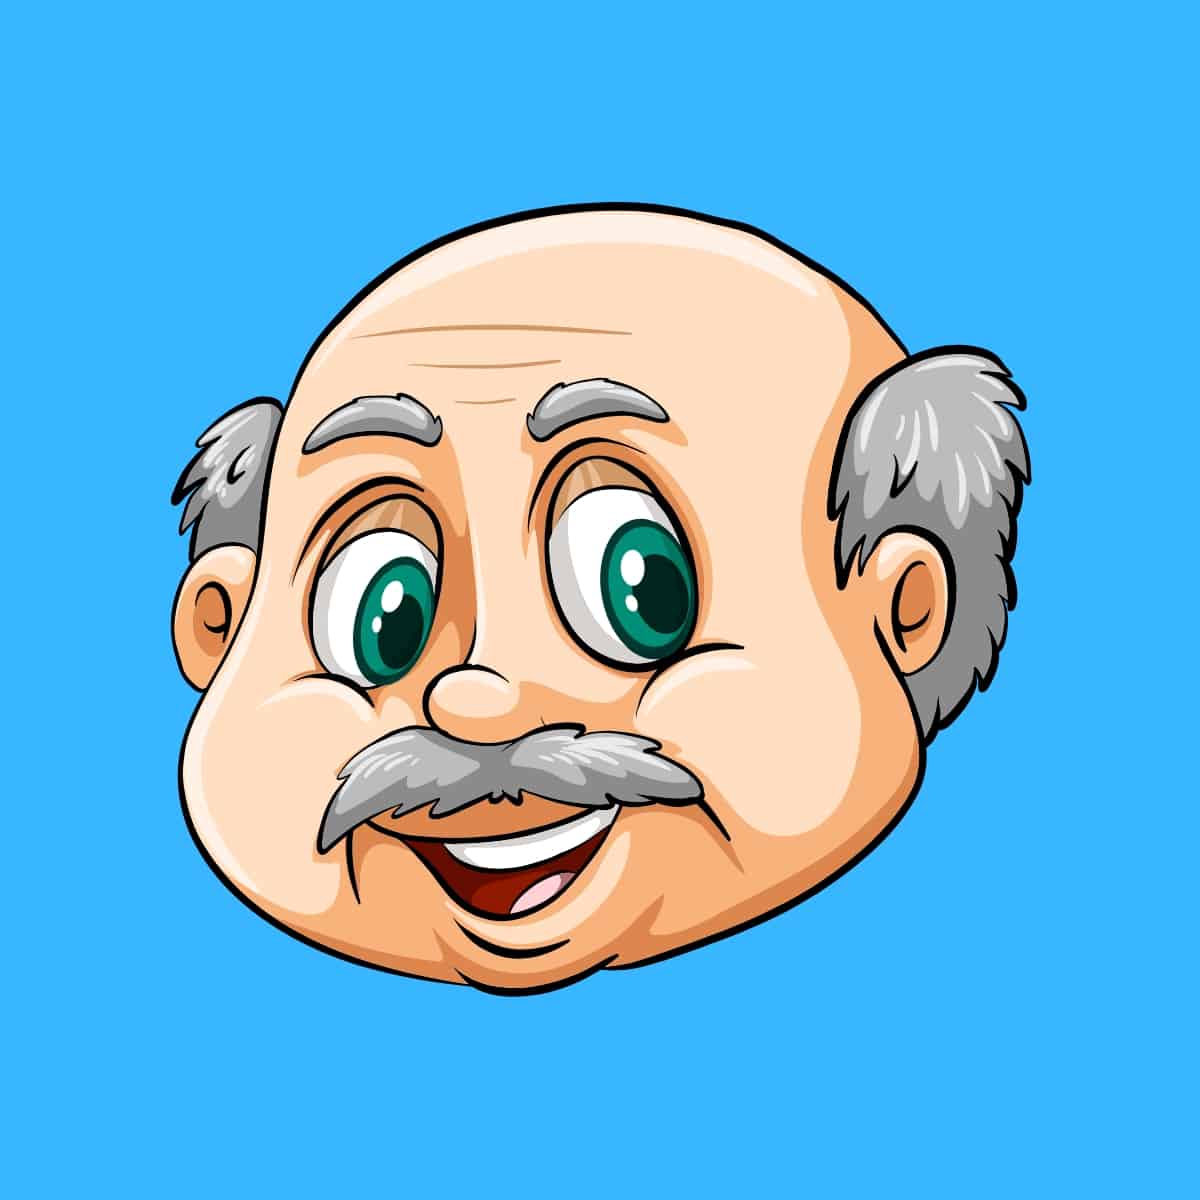 Cartoon graphic of an old man with a bald head on a blue background.